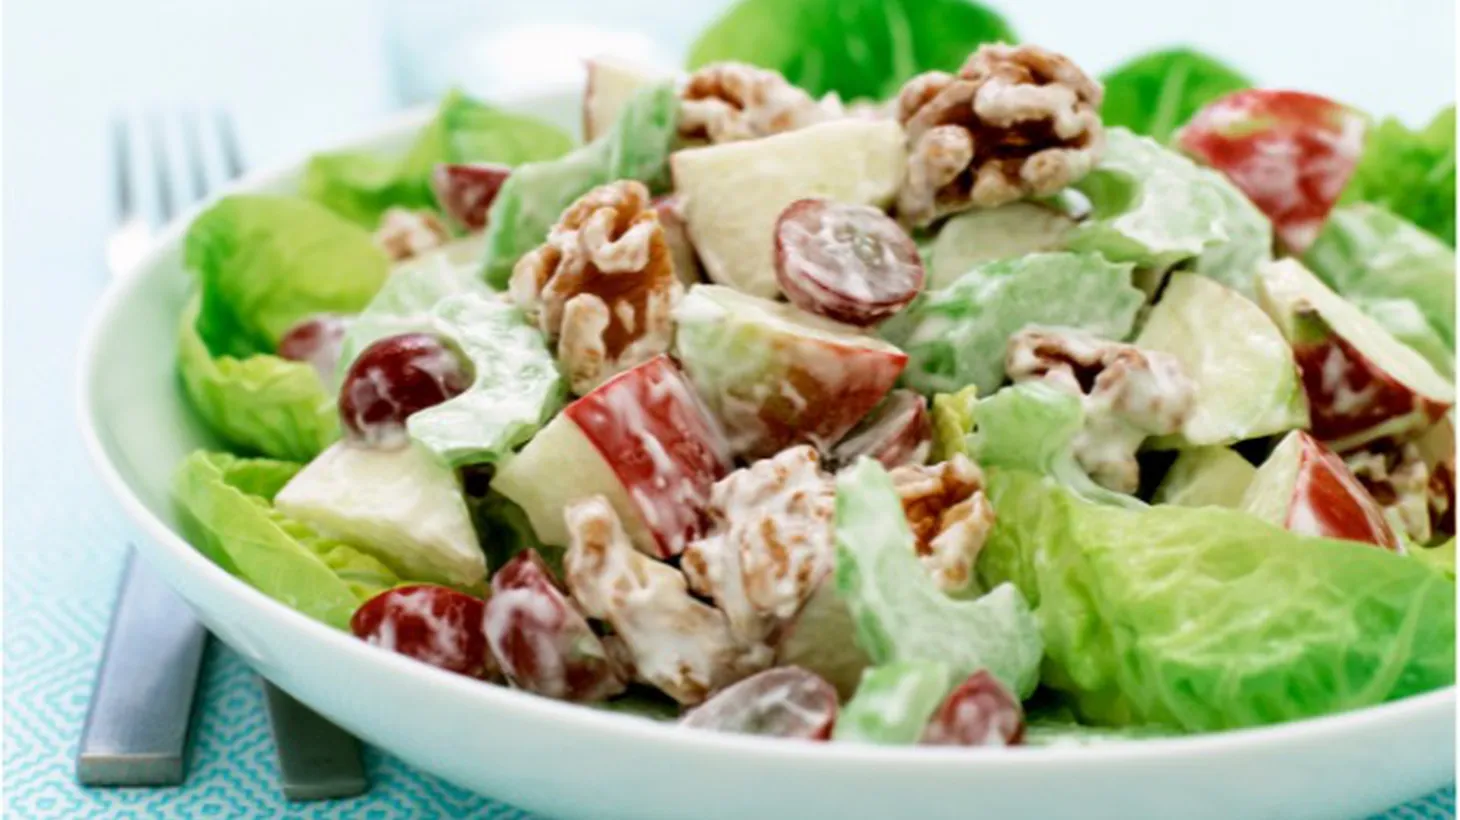 Waldorf salad, with its crisp sweet apples, is a welcome addition to a season filled with rich food.